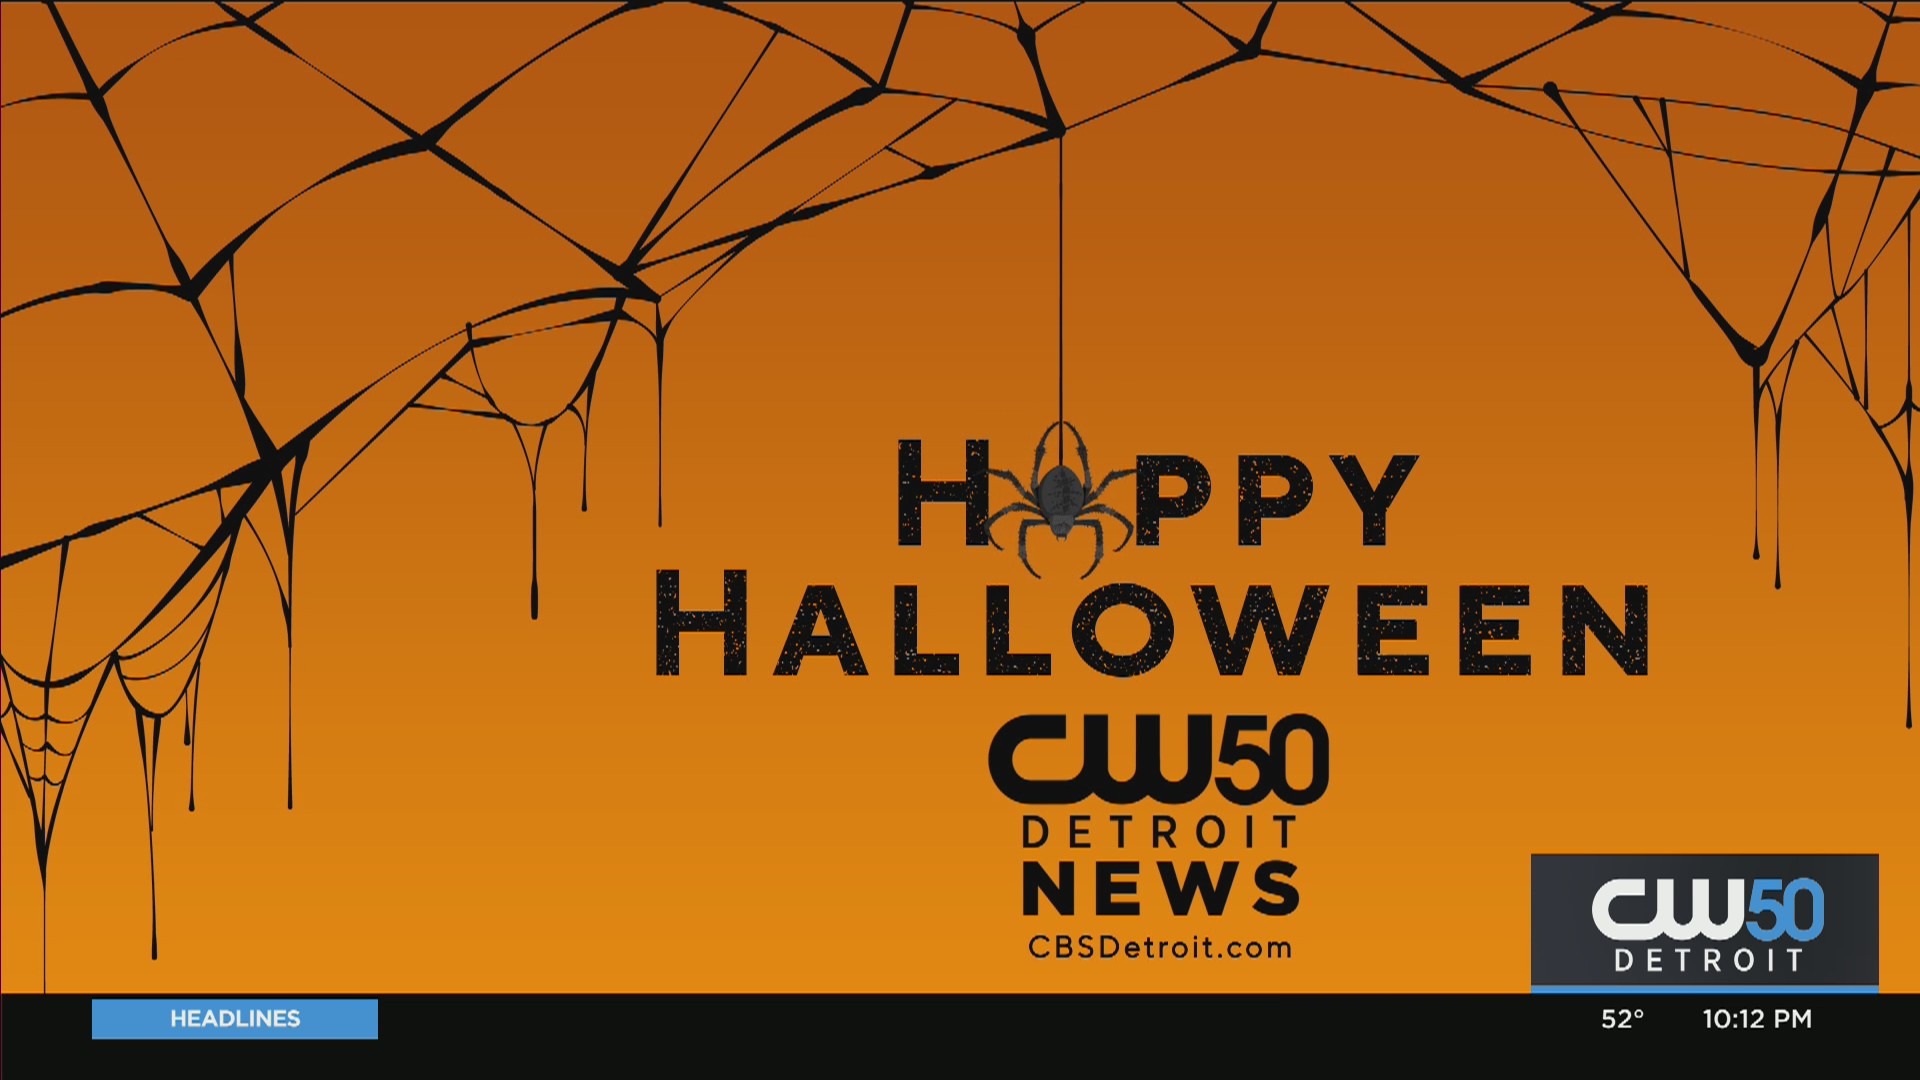 Michigan Health Department Recommends Best COVID Safety Practices Ahead Of Halloween